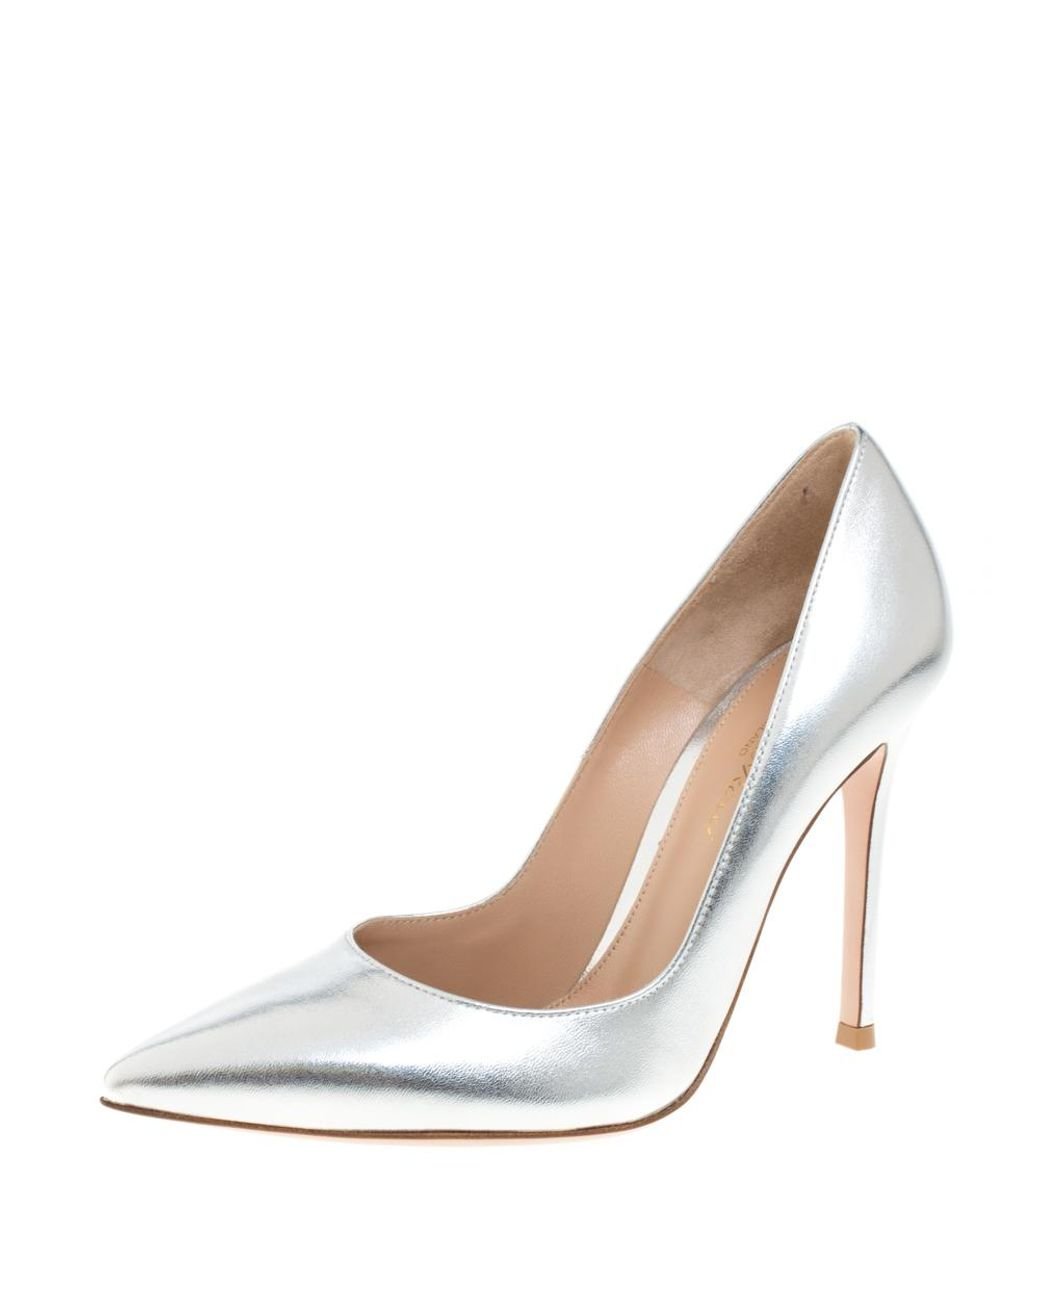 Gianvito Rossi Silver Leather Pointed Pumps in Metallic - Lyst